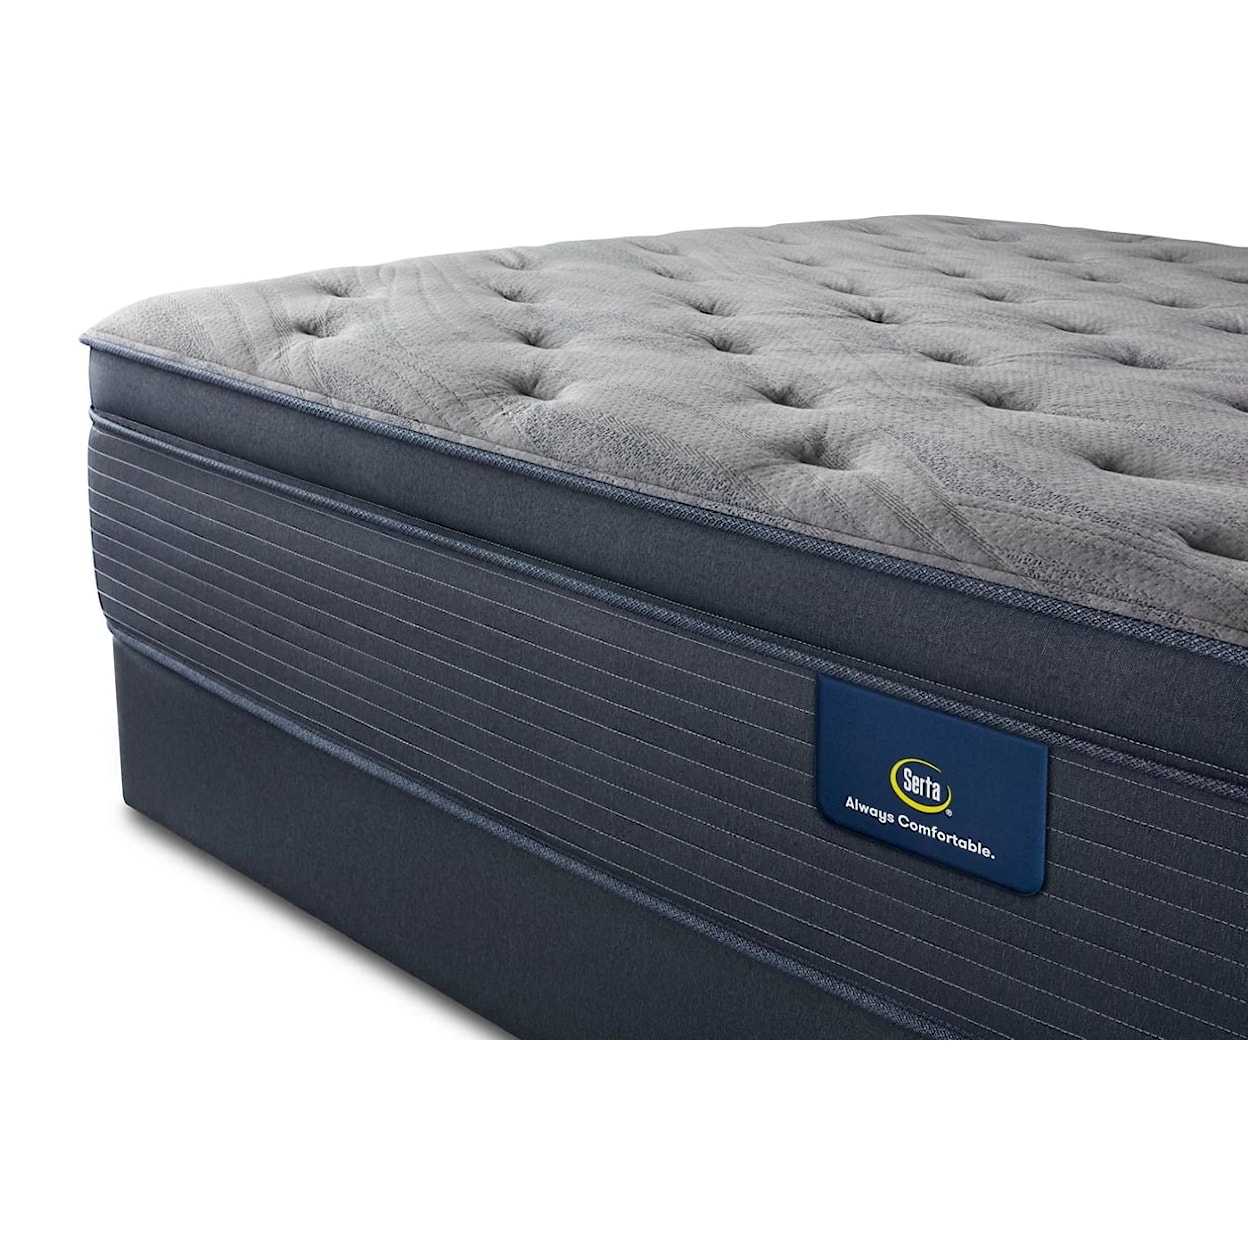 Serta Soothing Rest Soothing Rest Plush Pillow Top King Mattress